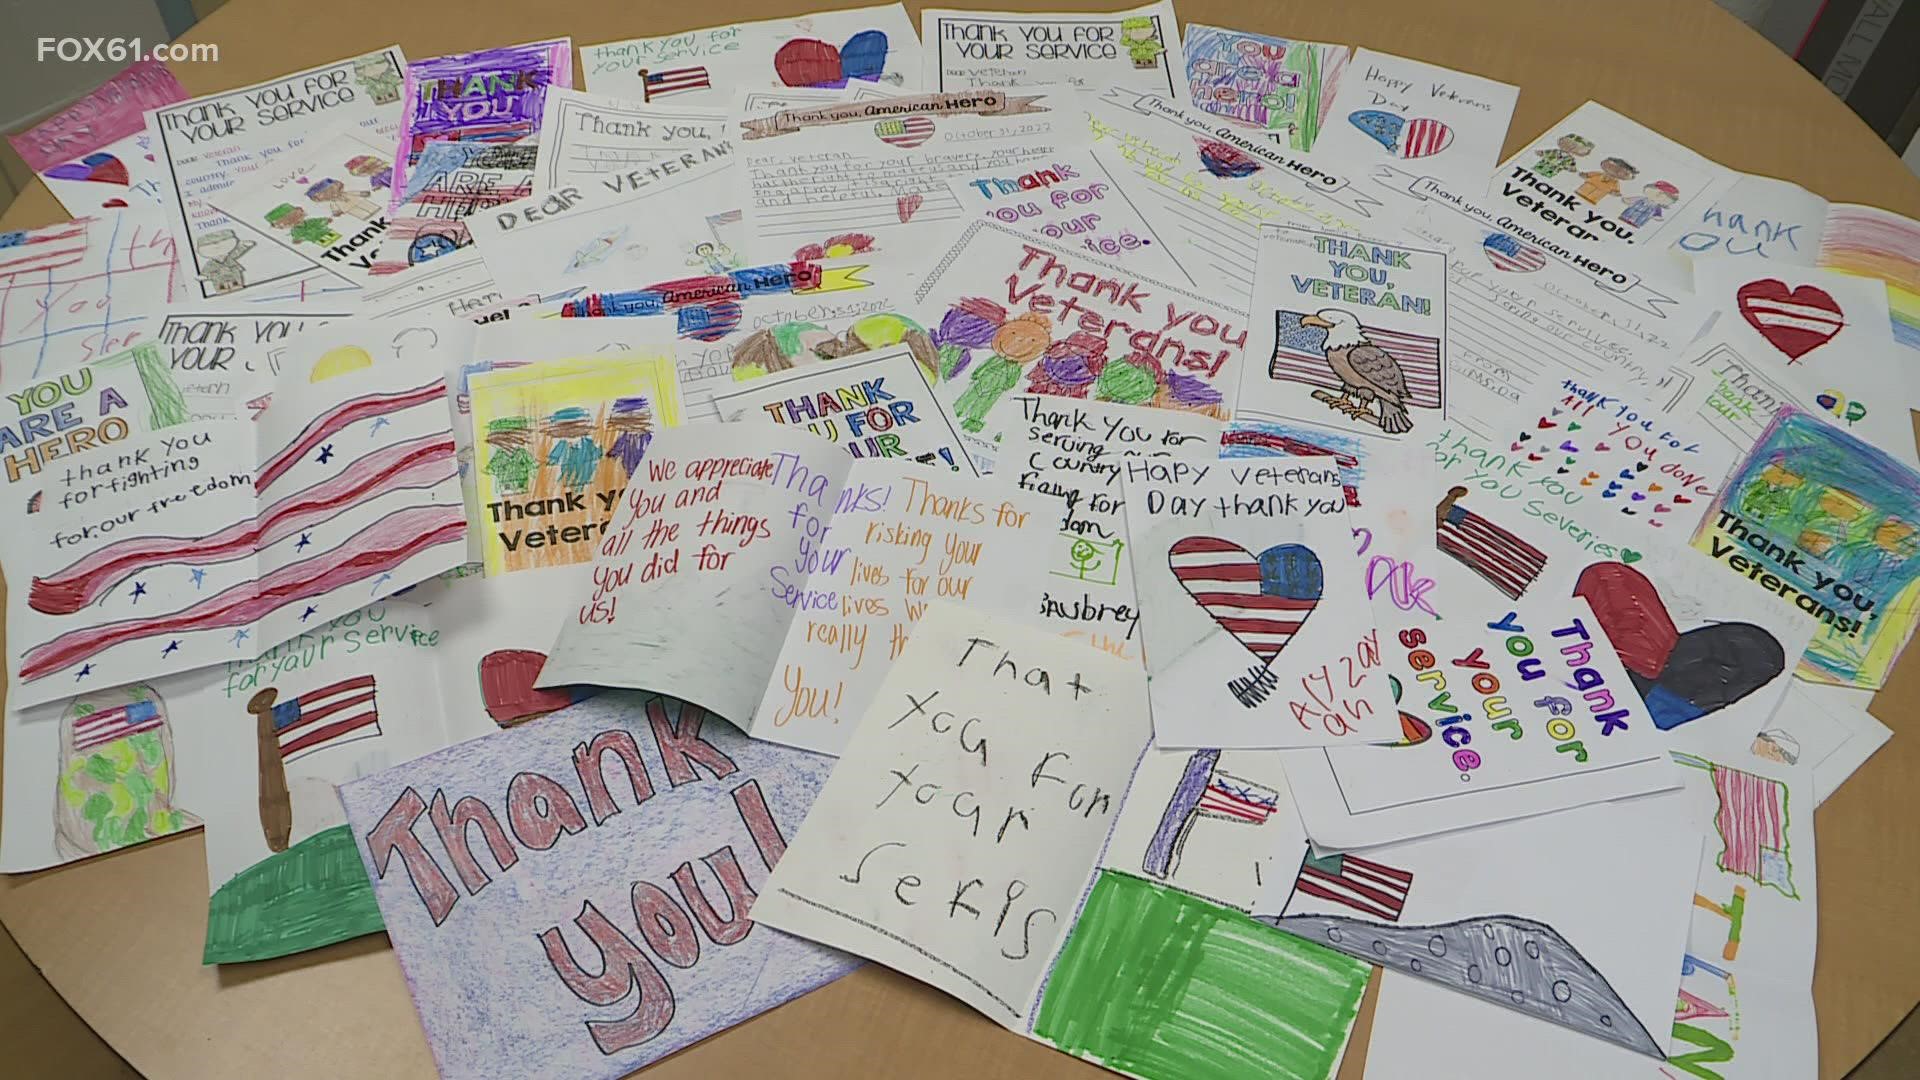 40 students created 284 cards at Maple Street School and they won a gold trophy for creating the most cards for veterans.